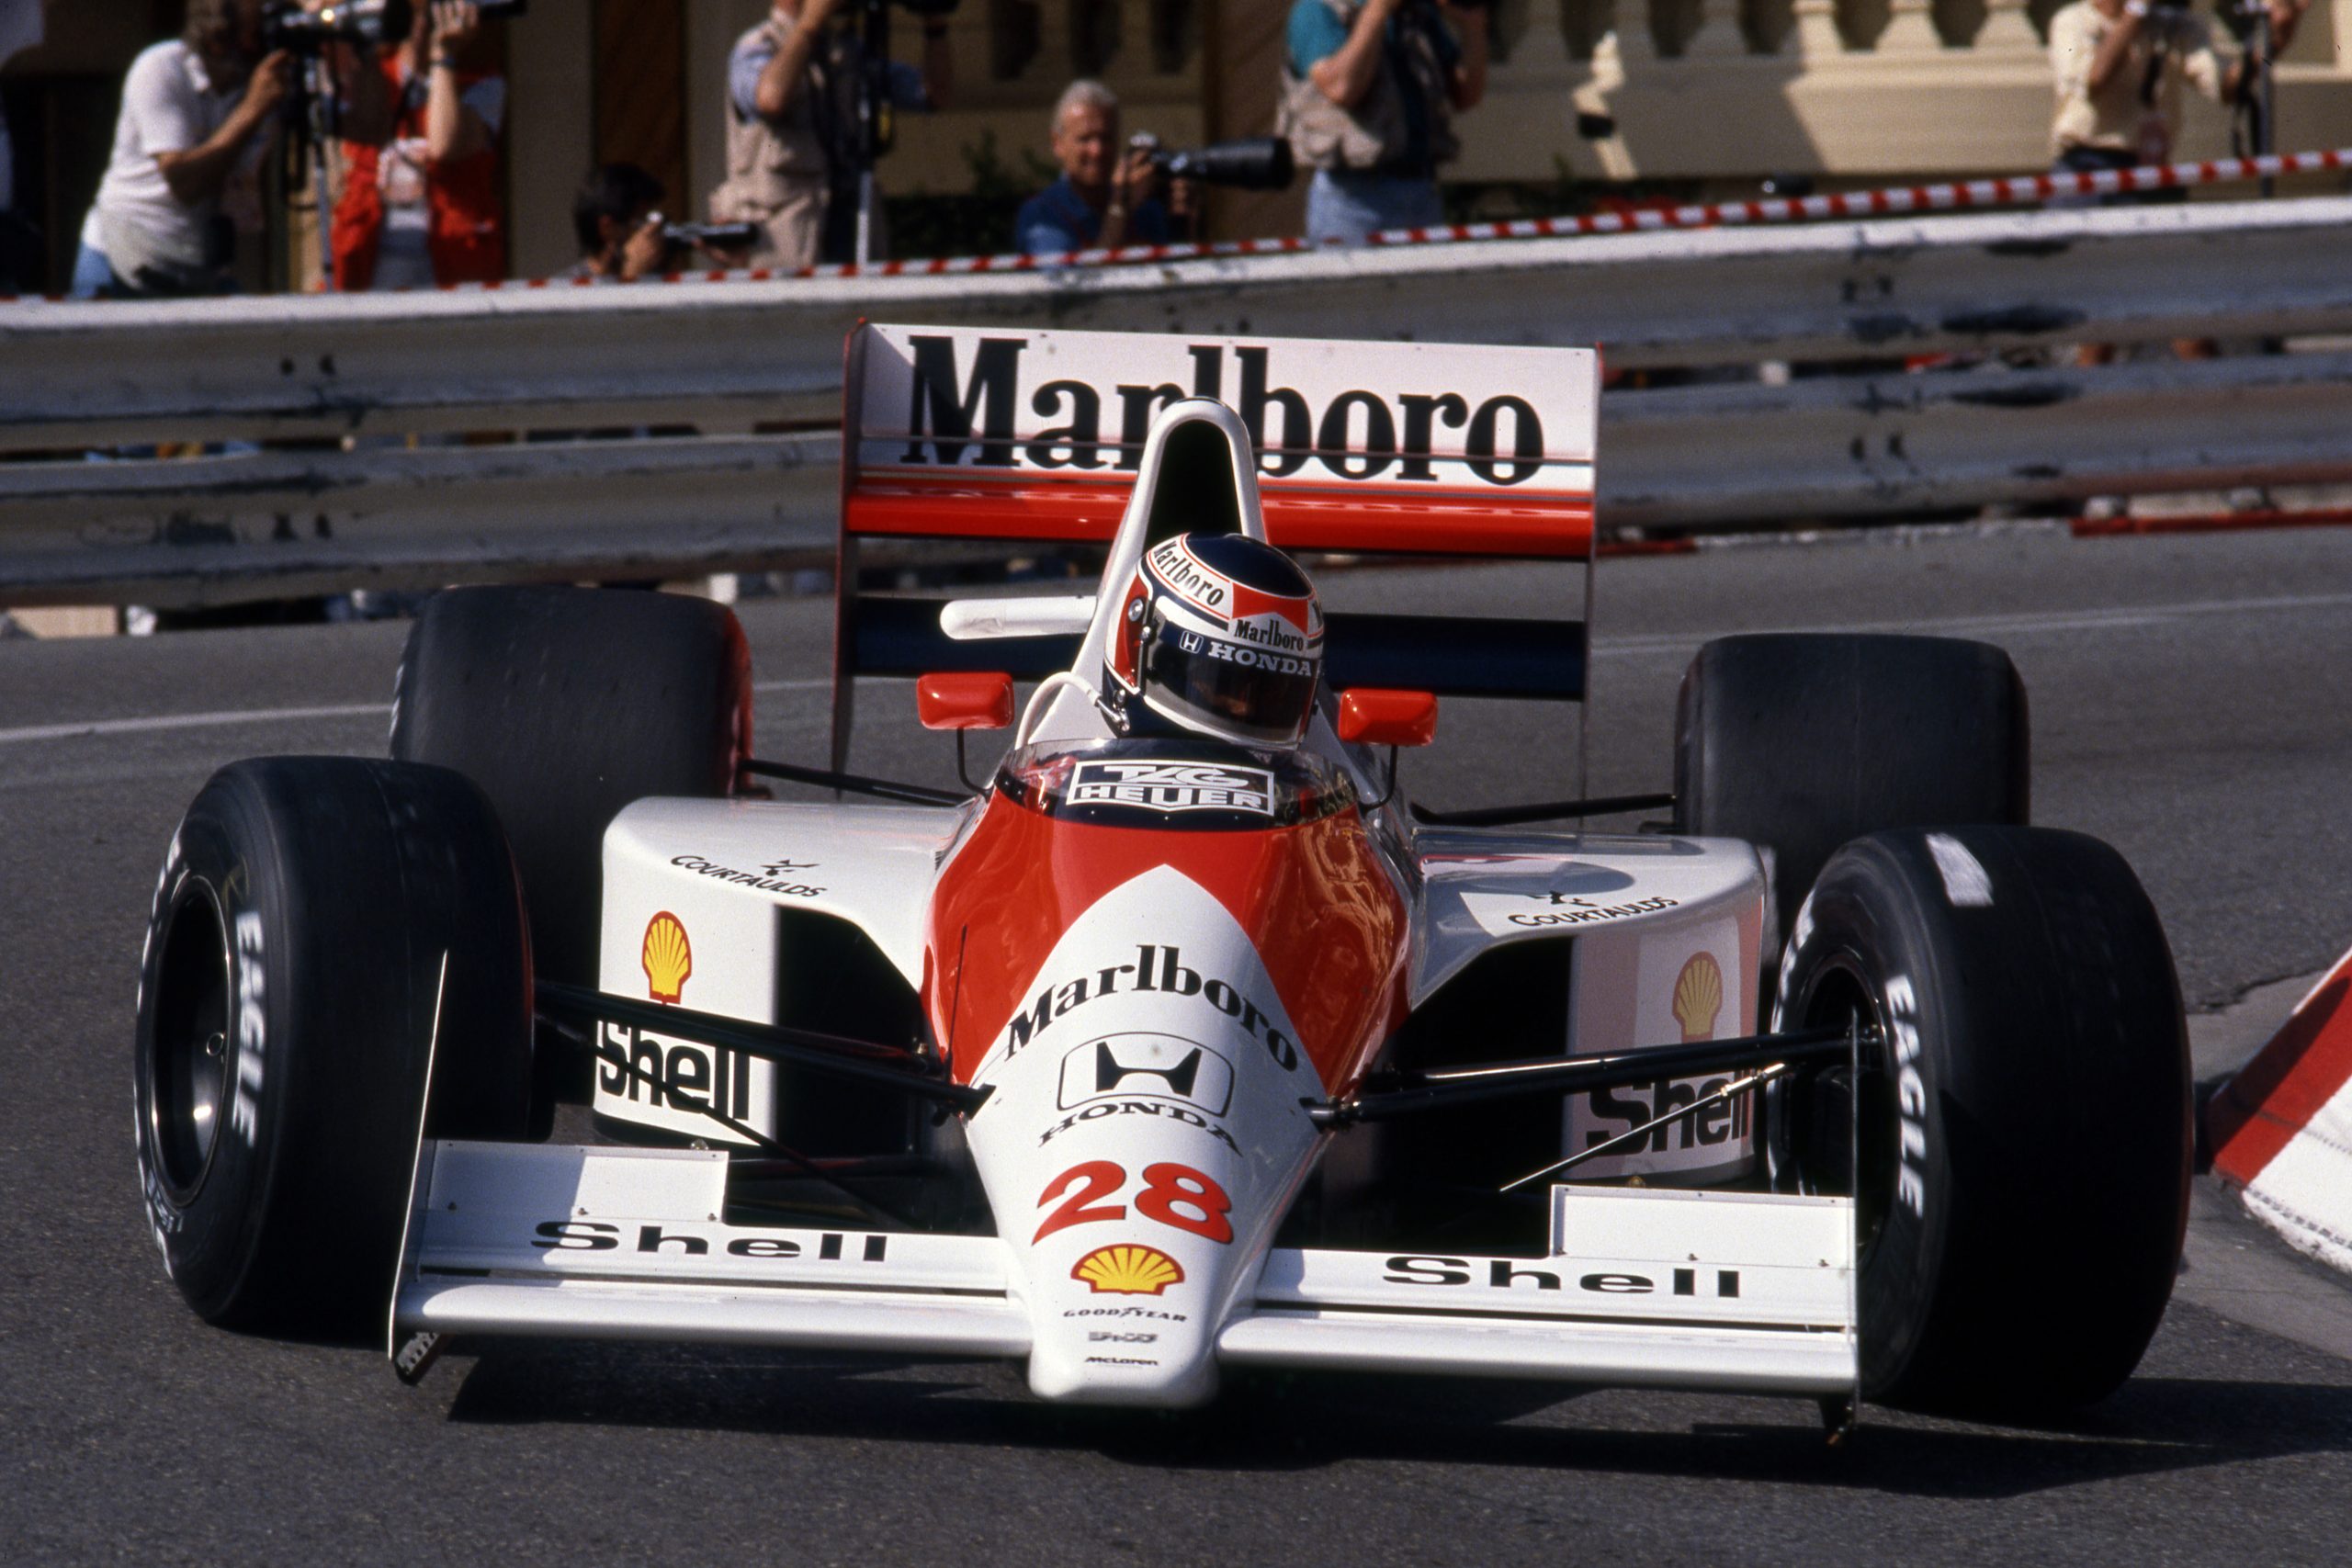 A McLaren MP4/5B driven by Senna is for sale